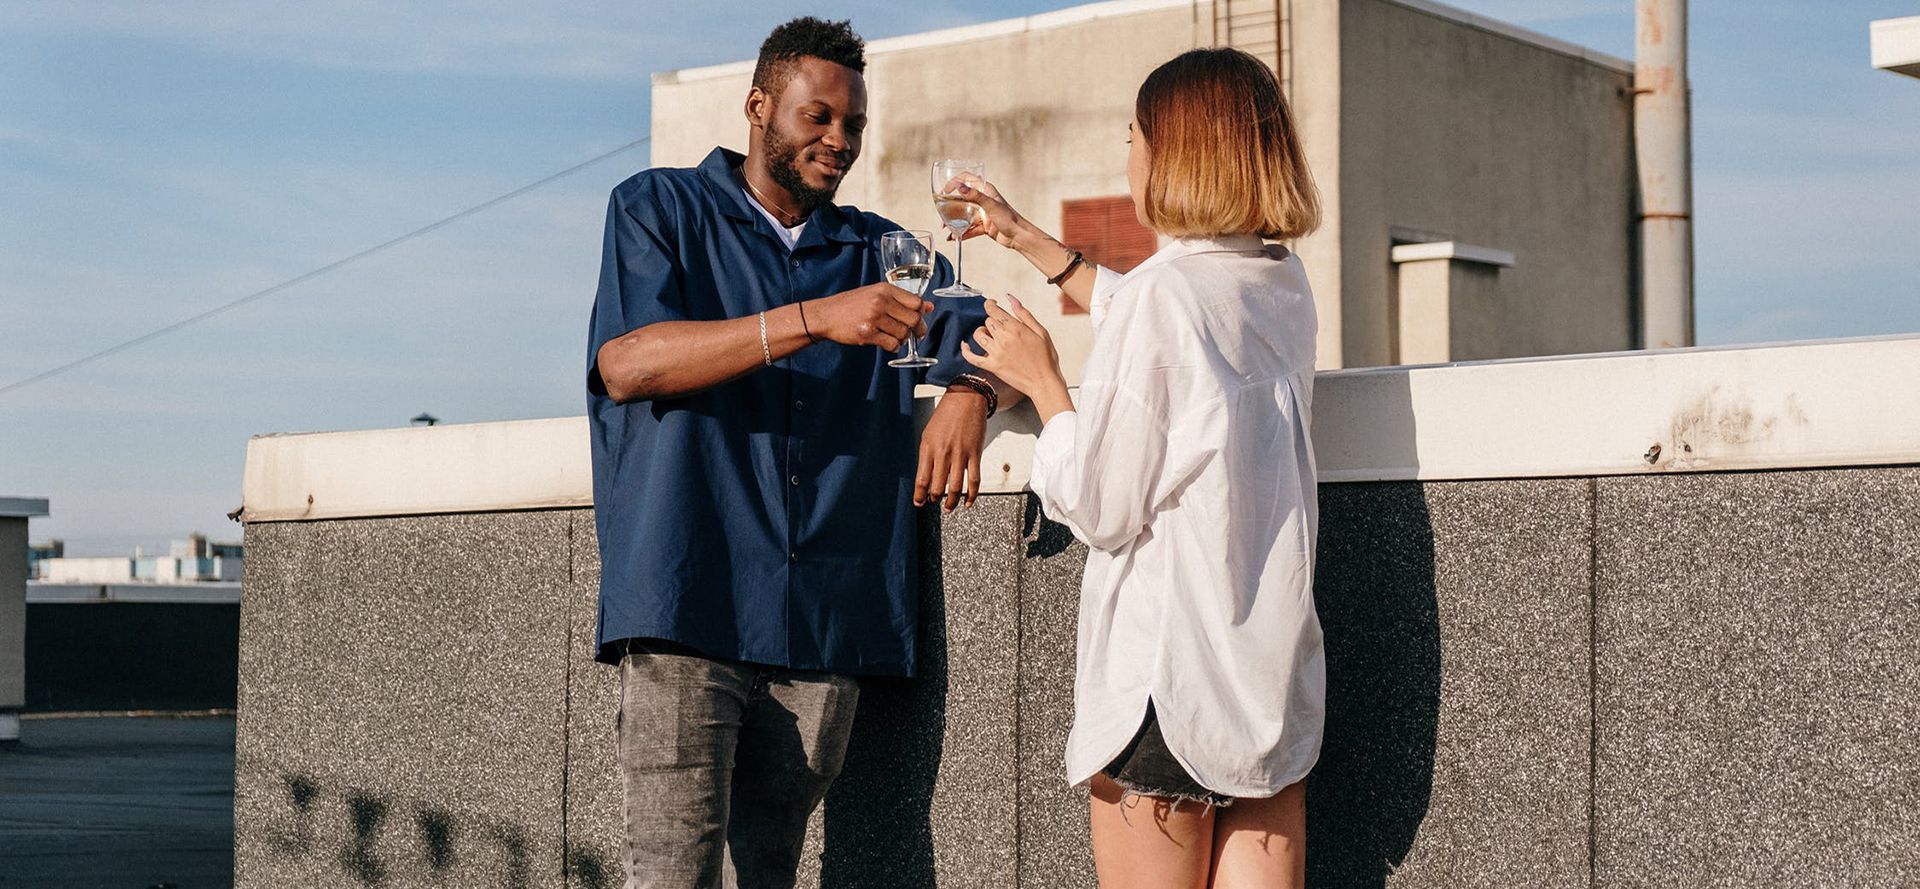 Man invites his woman friend on dating on the roof.